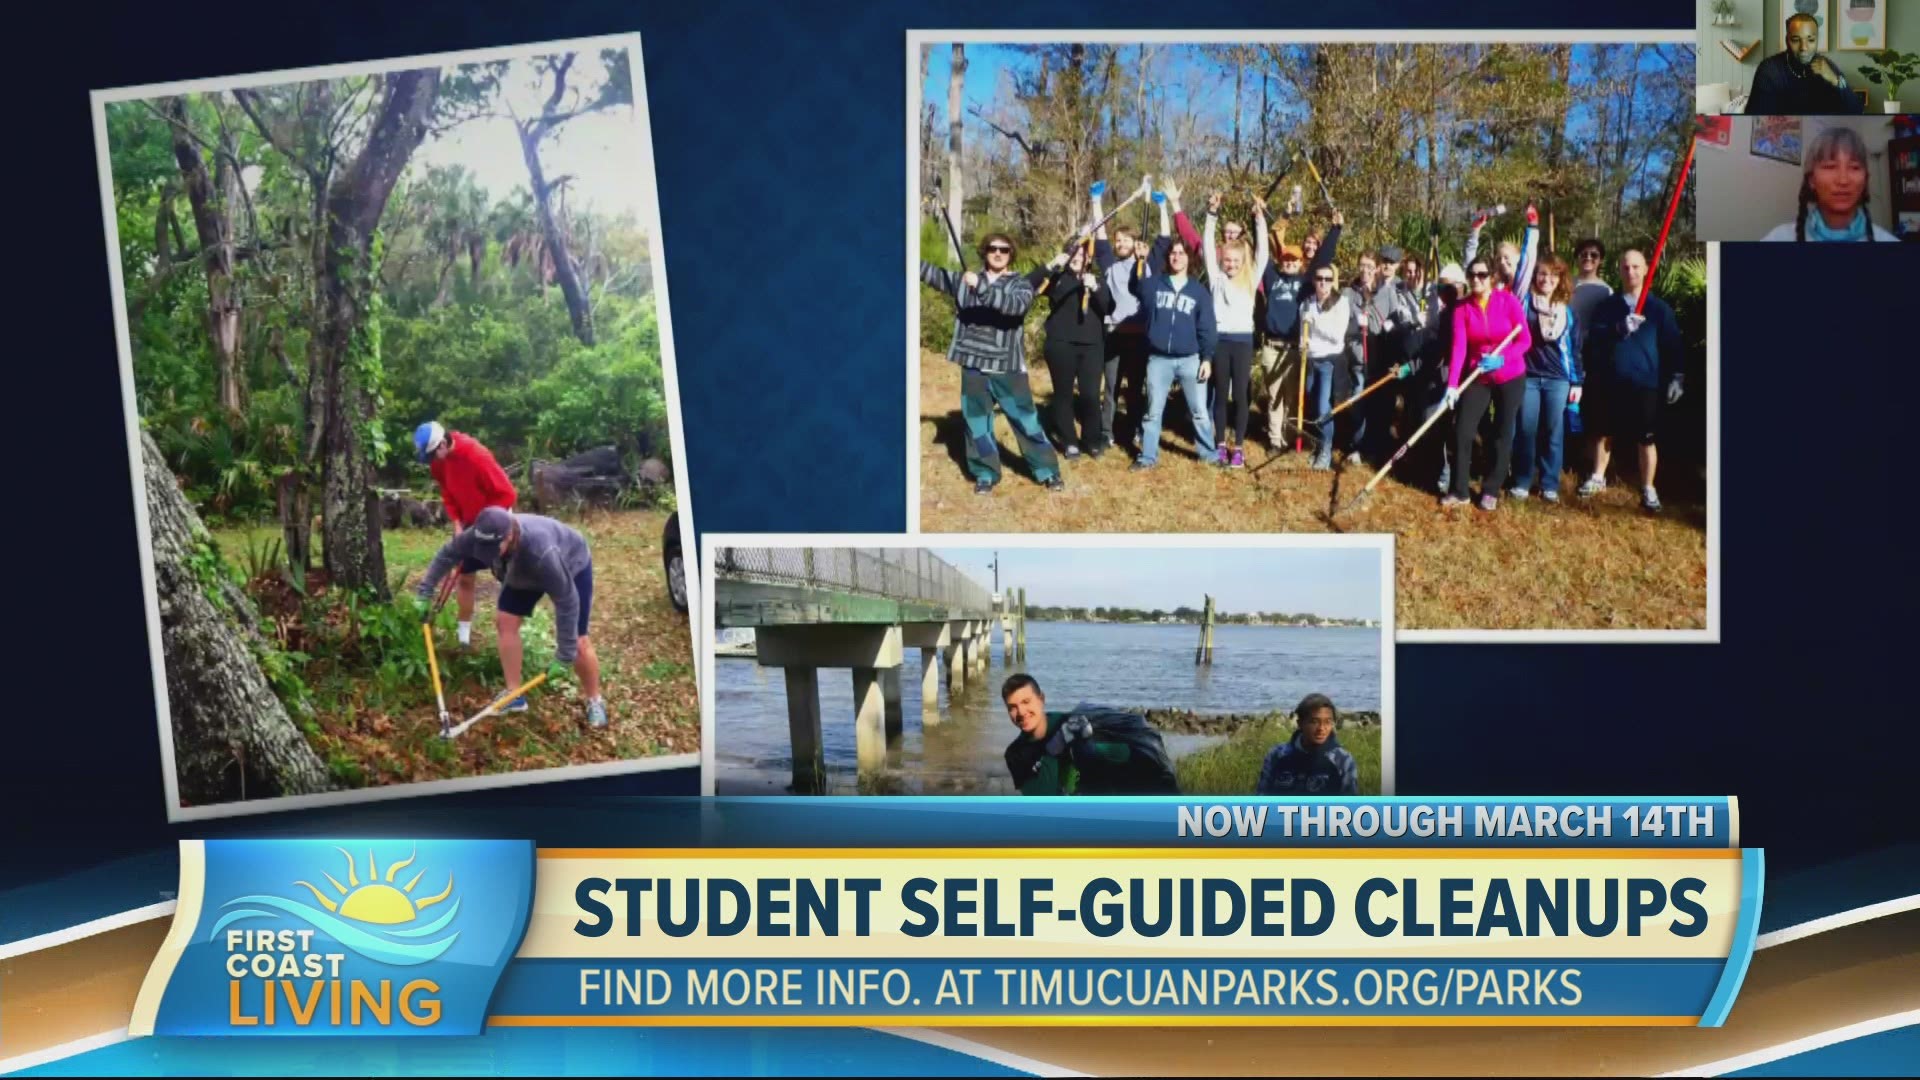 Students can earn community service hours through March 14 by collecting litter at a park.